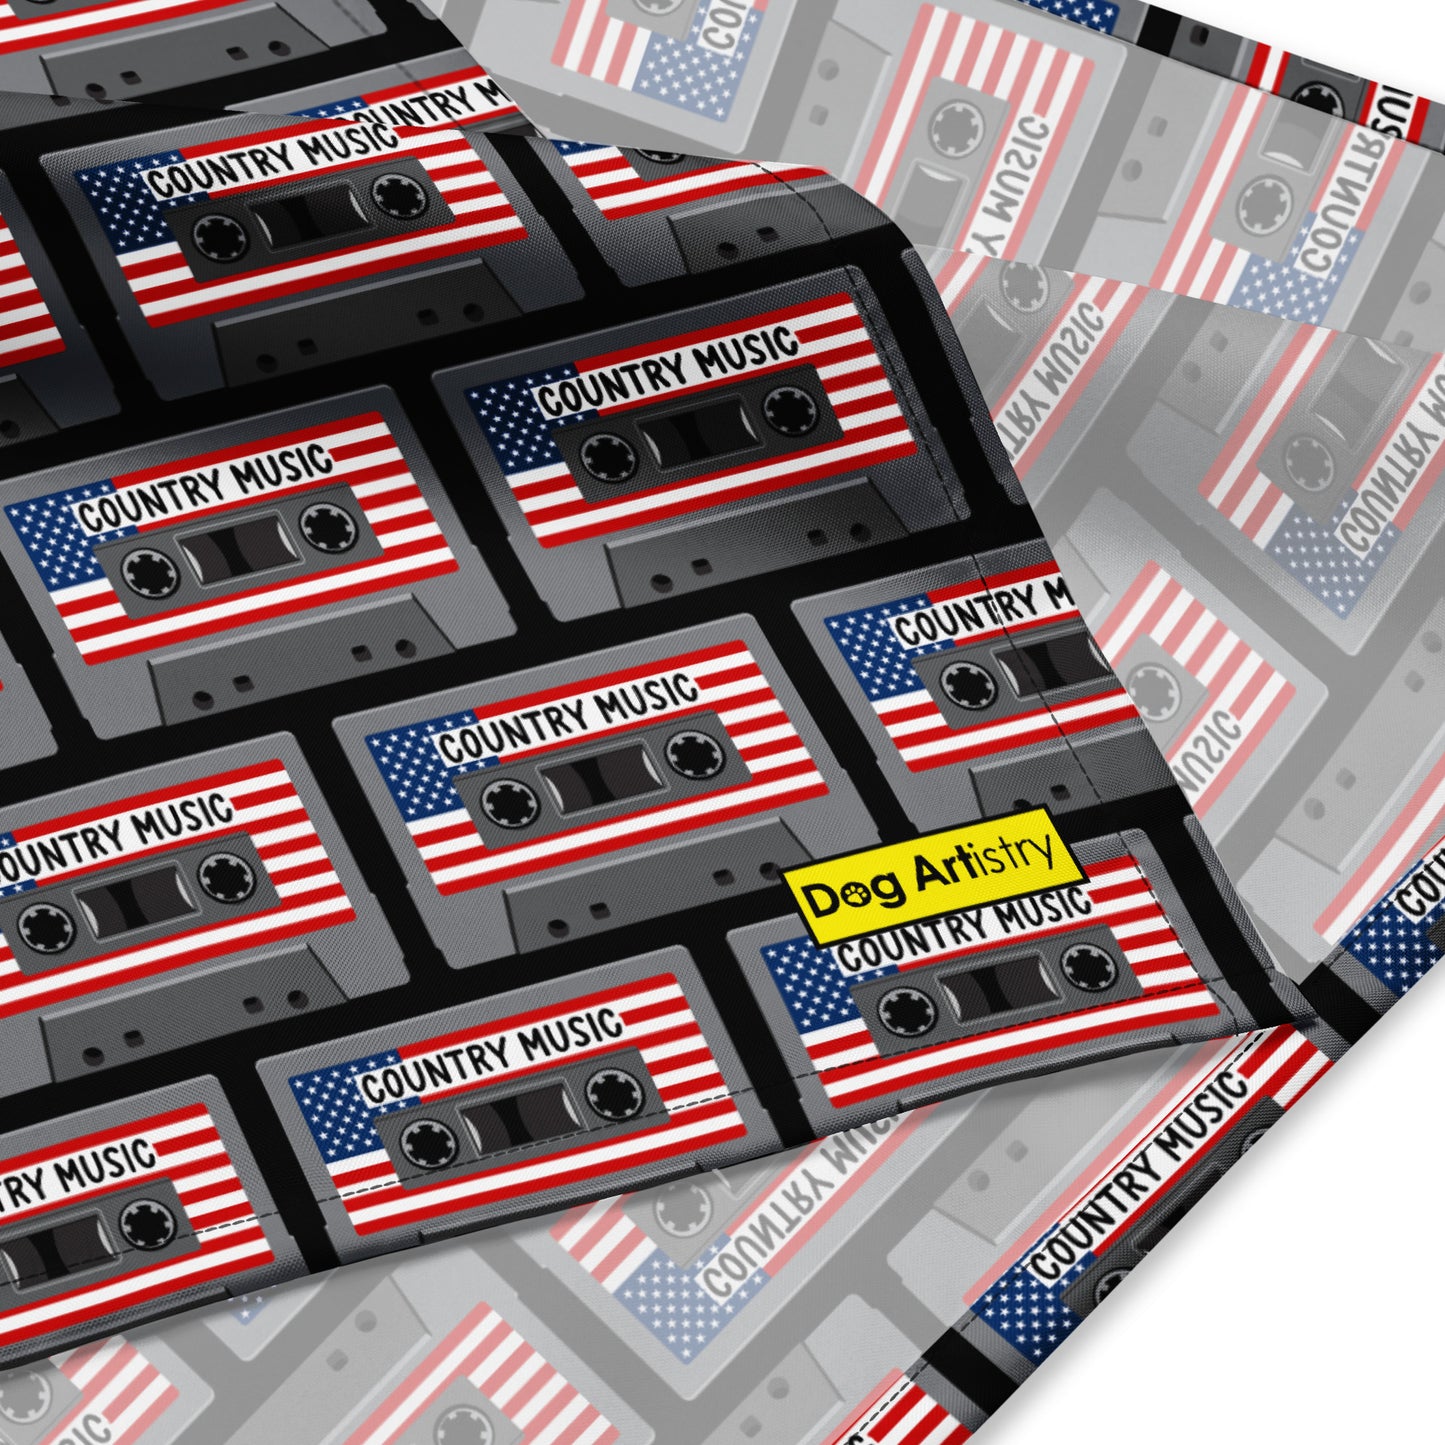 Country Music (Black) Cassette Tapes with American Flag All-over print bandana